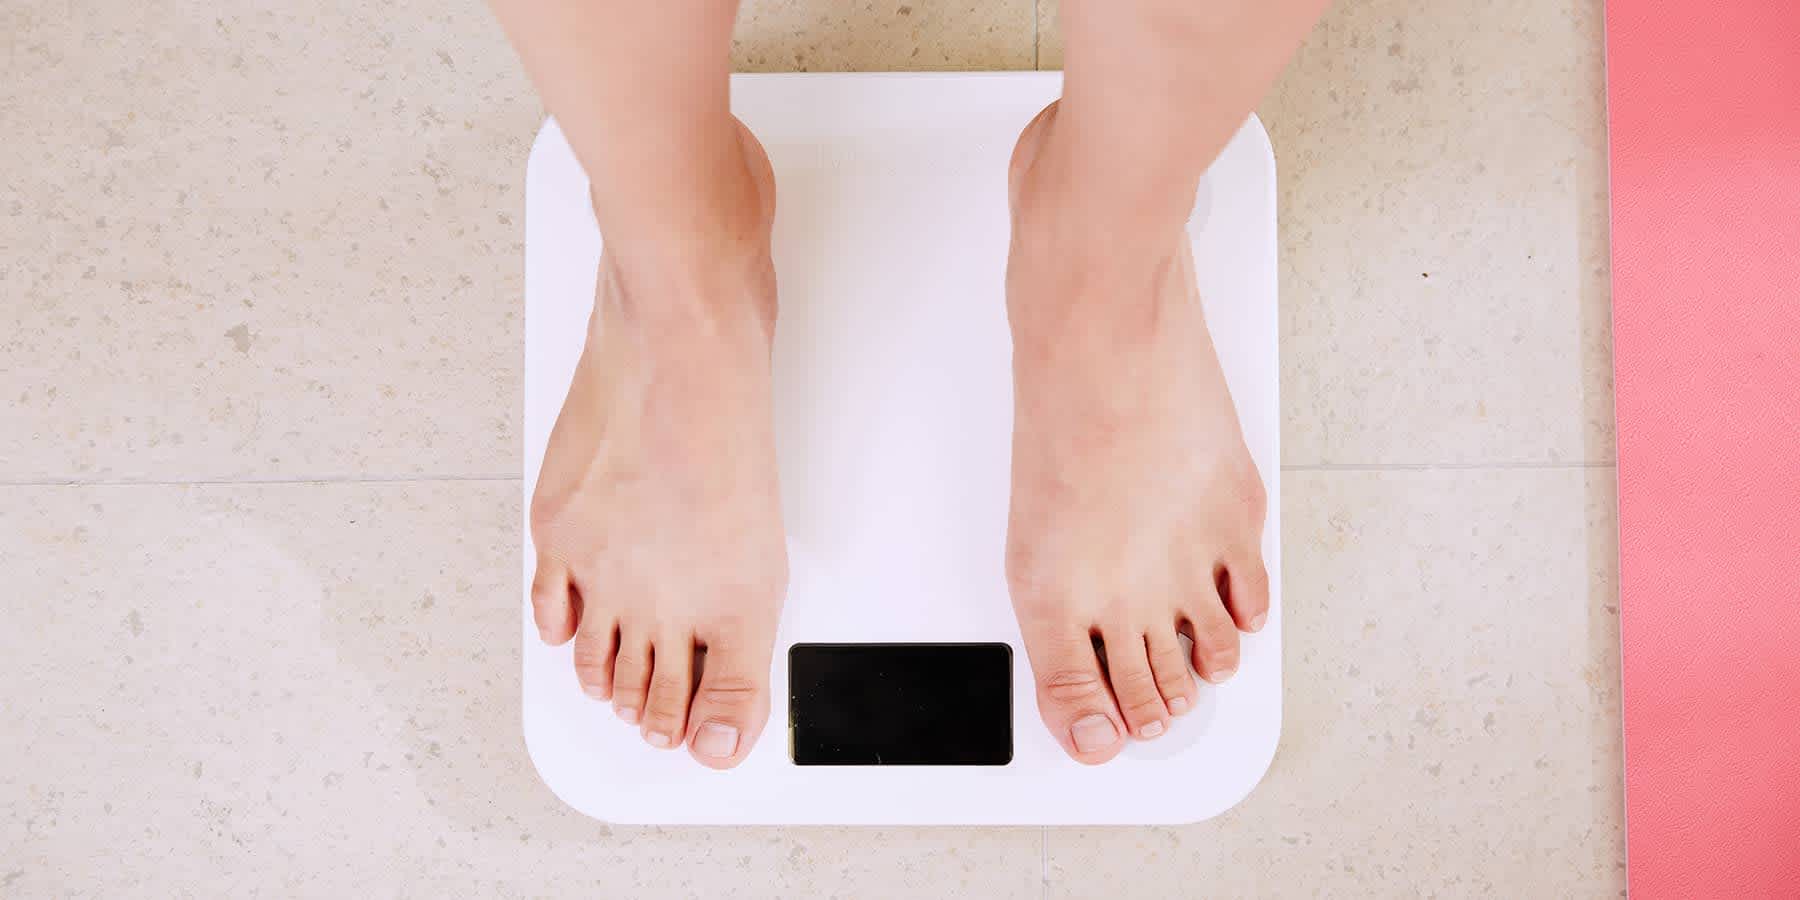 Woman standing on bathroom scale while wondering about weight fluctuation in women